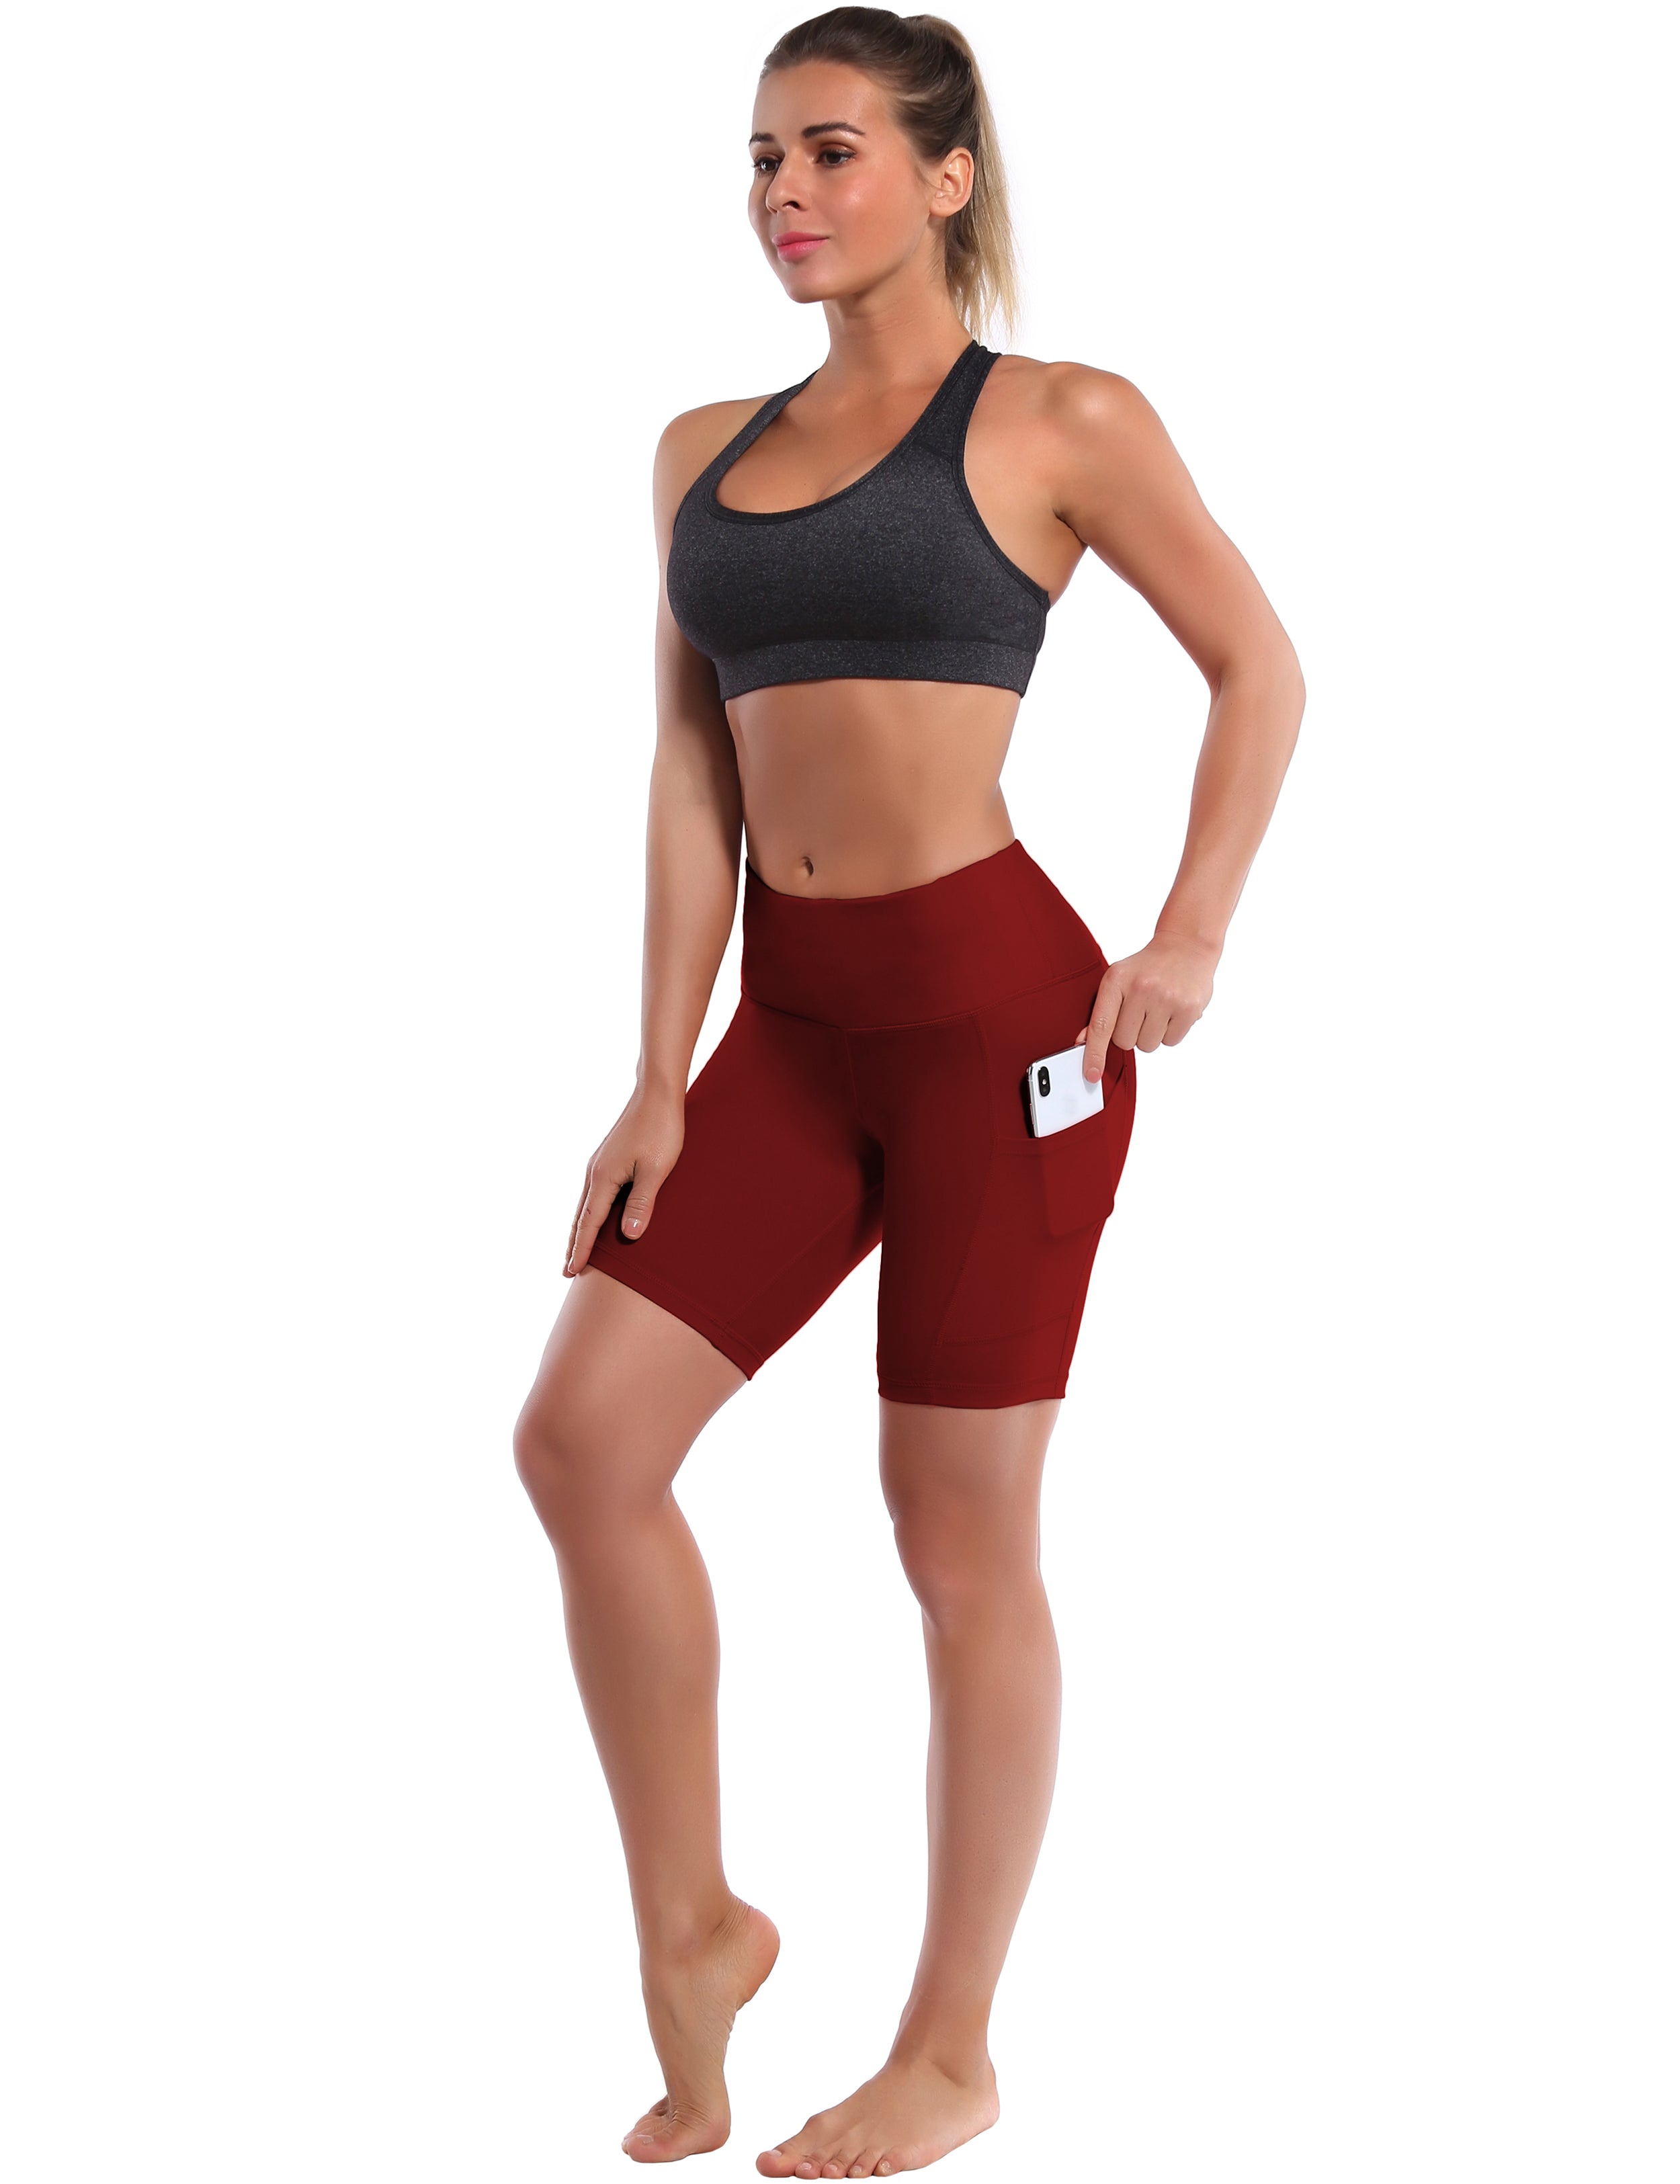 8" Side Pockets Biking Shorts cherryred Sleek, soft, smooth and totally comfortable: our newest style is here. Softest-ever fabric High elasticity High density 4-way stretch Fabric doesn't attract lint easily No see-through Moisture-wicking Machine wash 75% Nylon, 25% Spandex